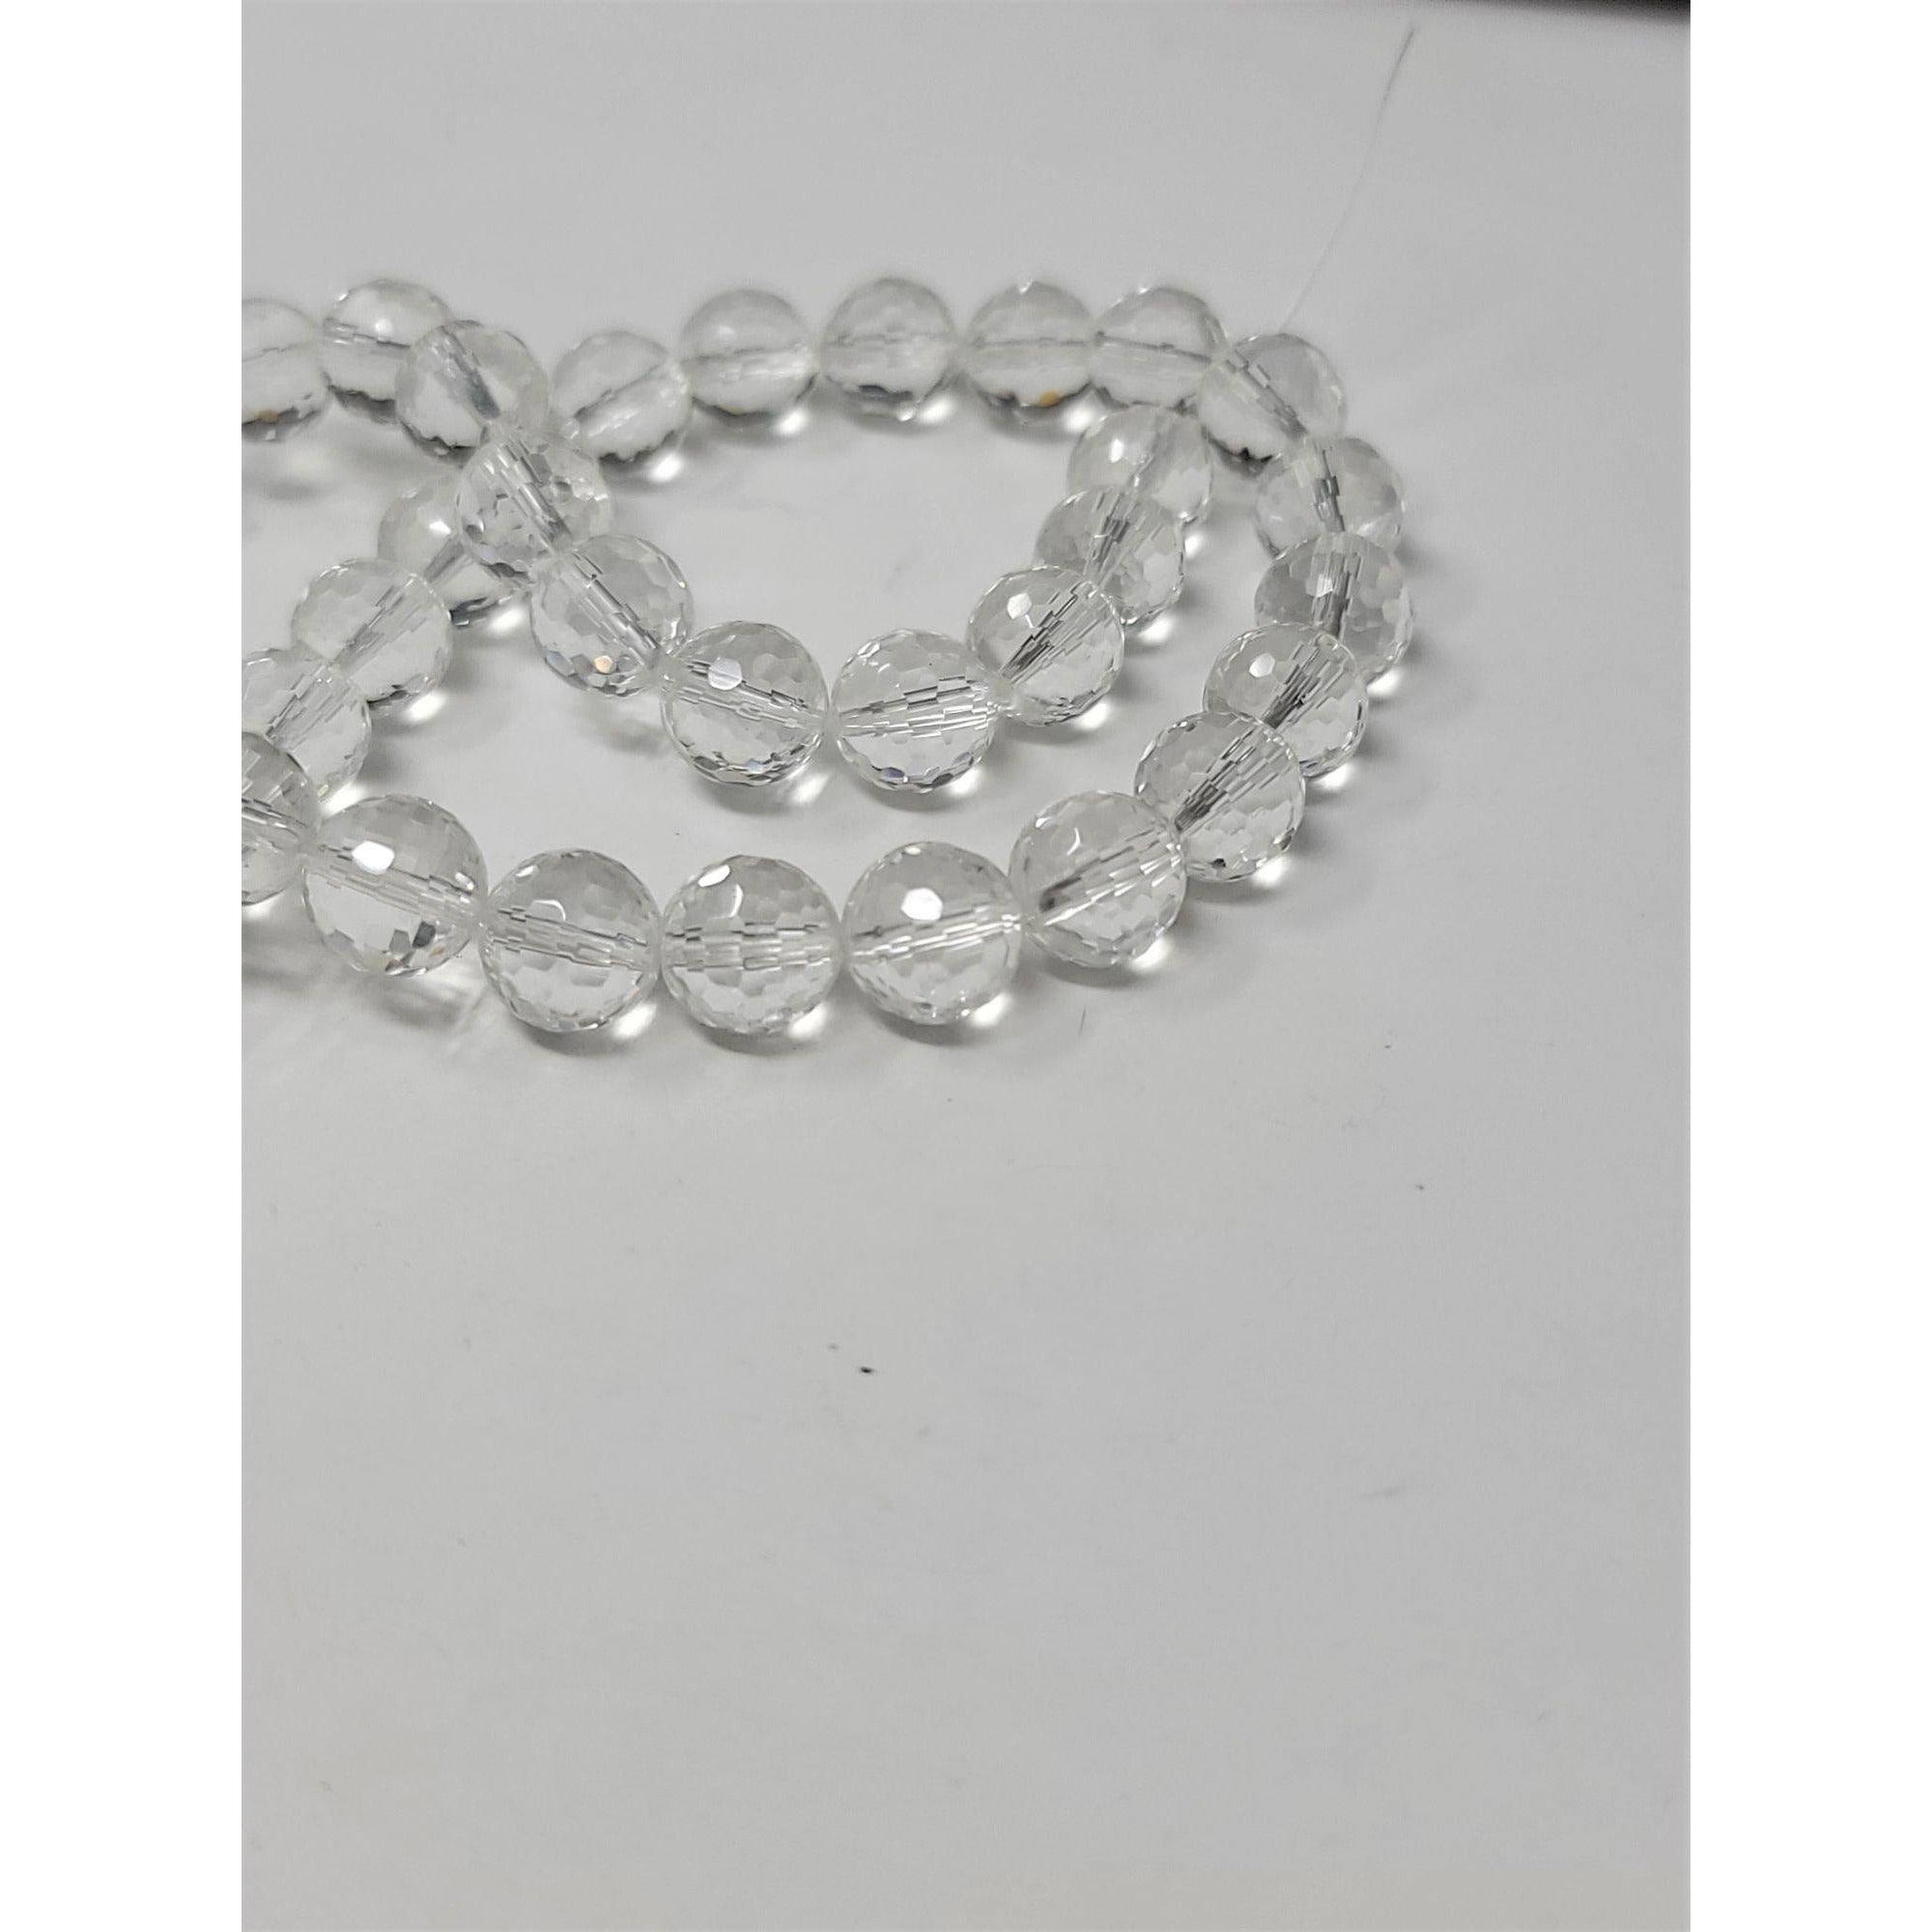 Rock Crystal Quartz Faceted Round Beads 10 mm